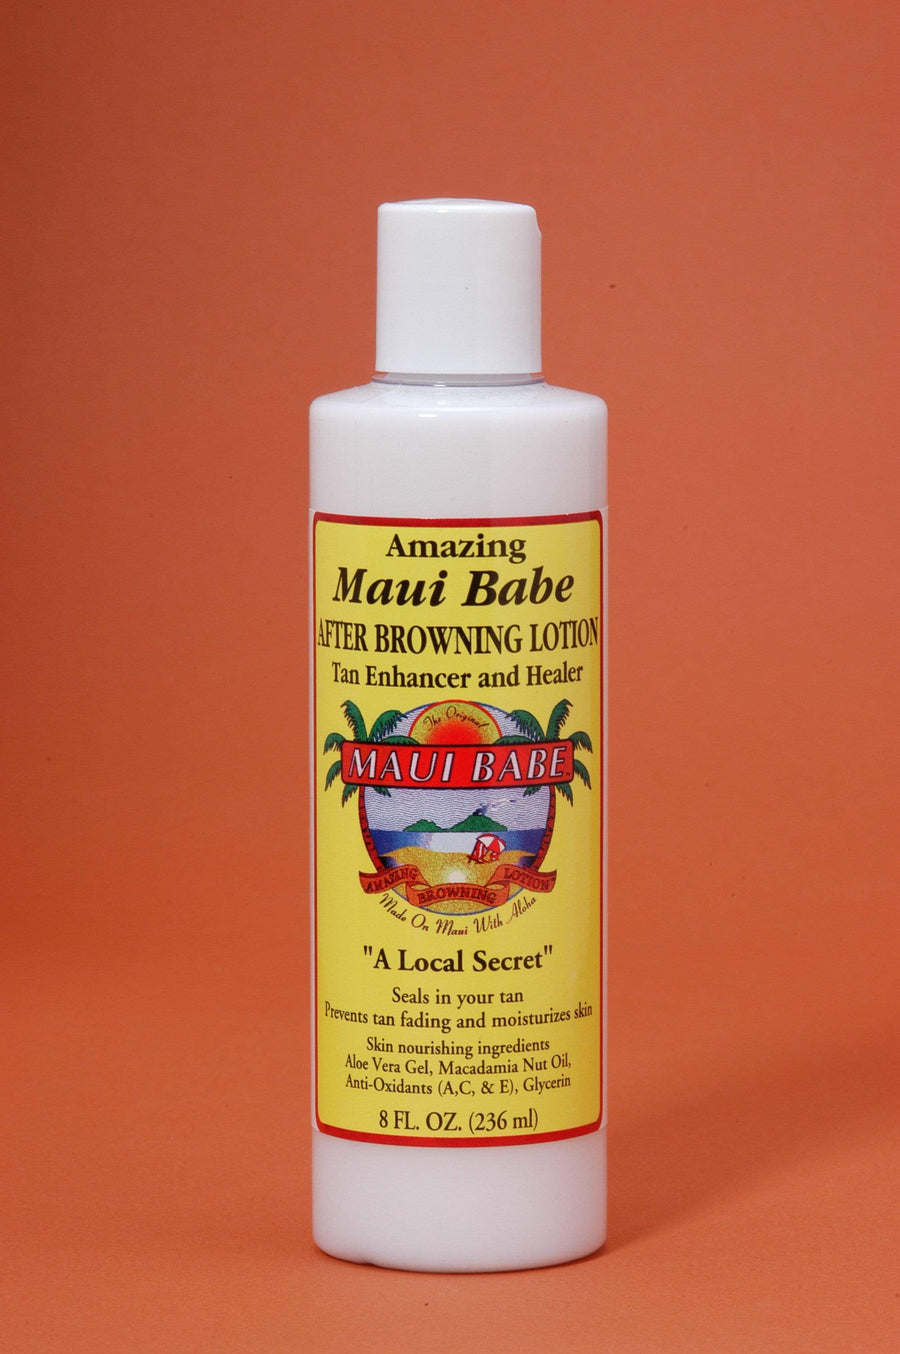 Maui Babe TANNING MAUI BABE // AFTER BROWNING LOTION 8oz